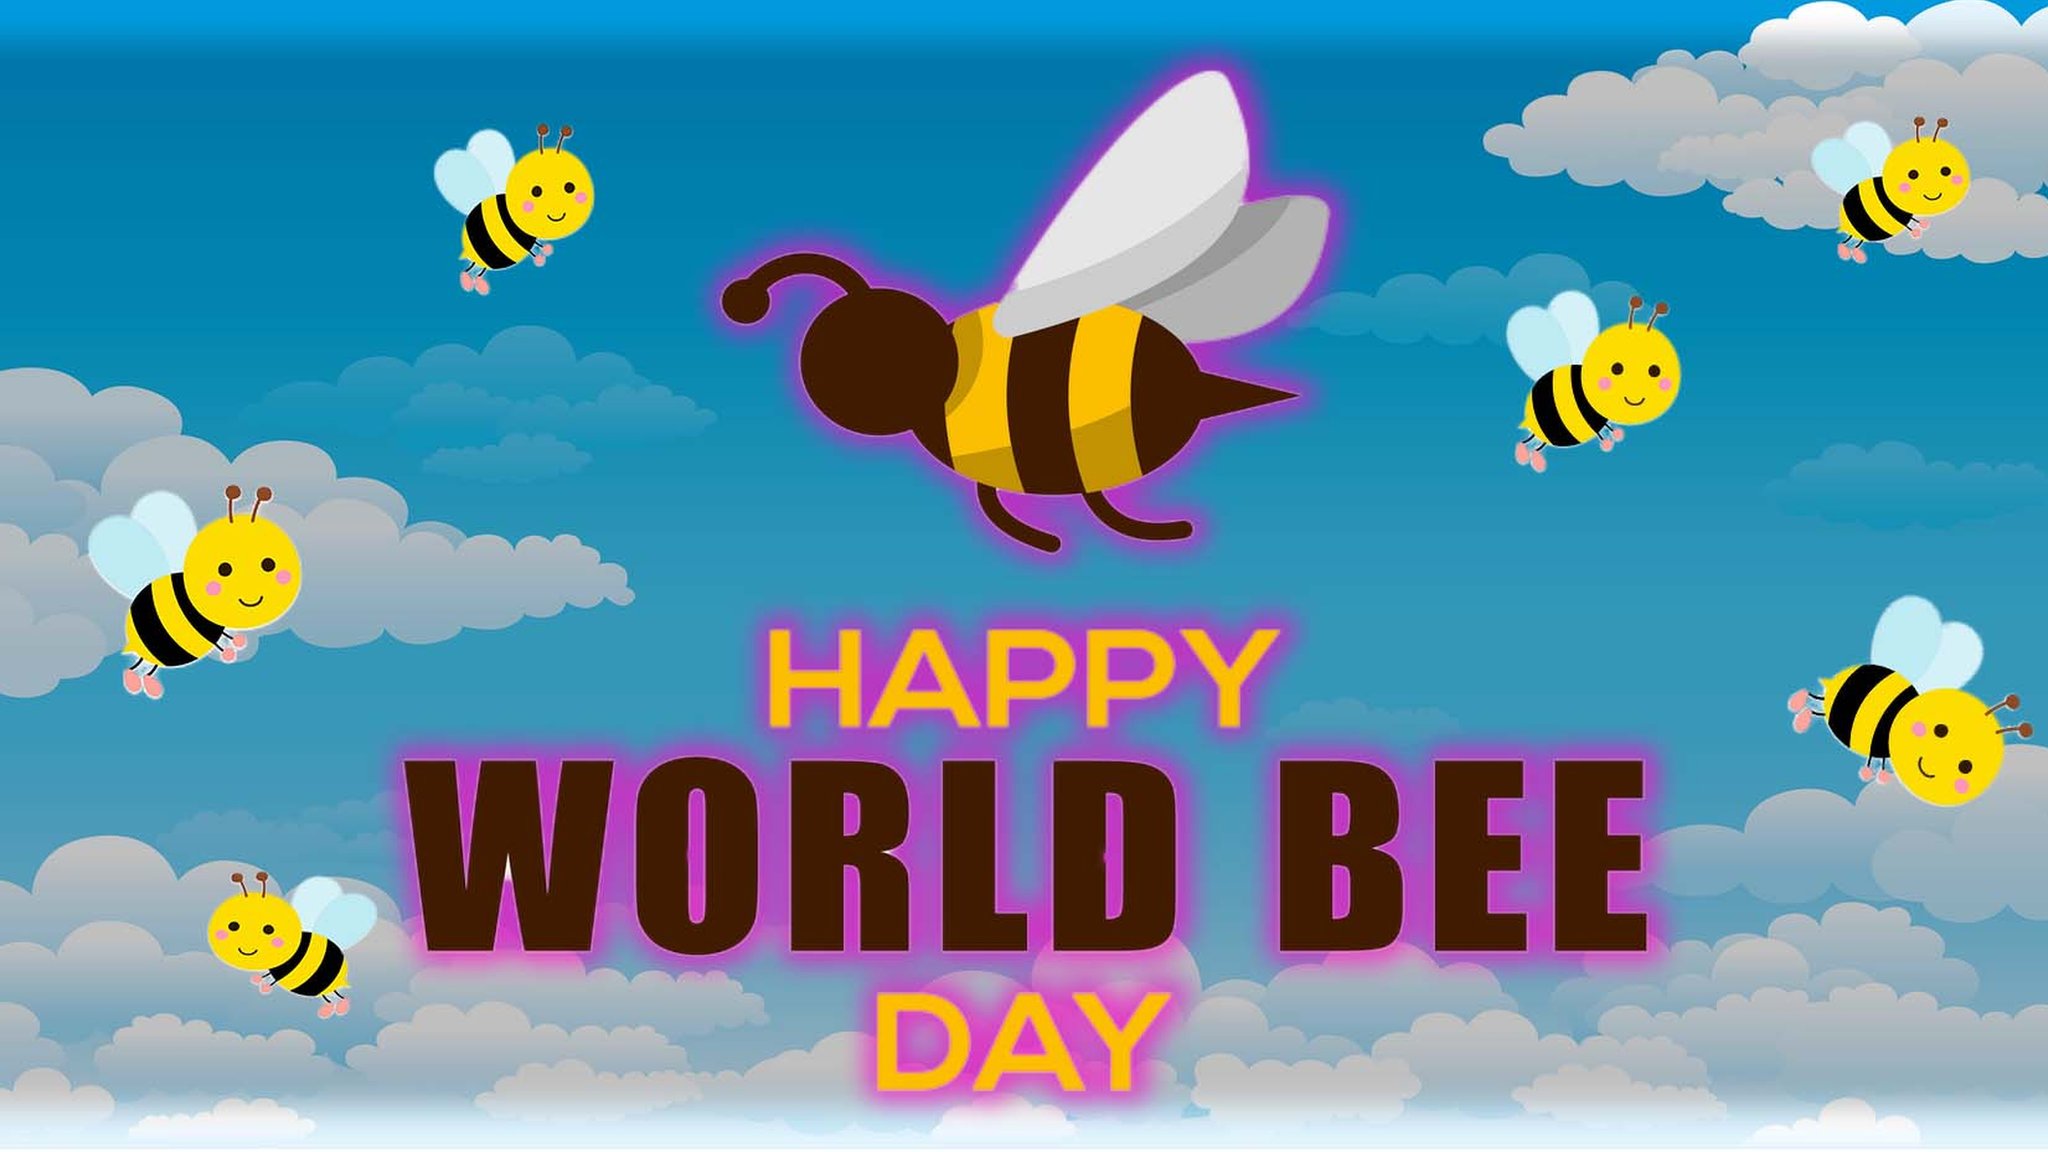 World Bee Day 2021 What's all the buzz about? CBBC Newsround